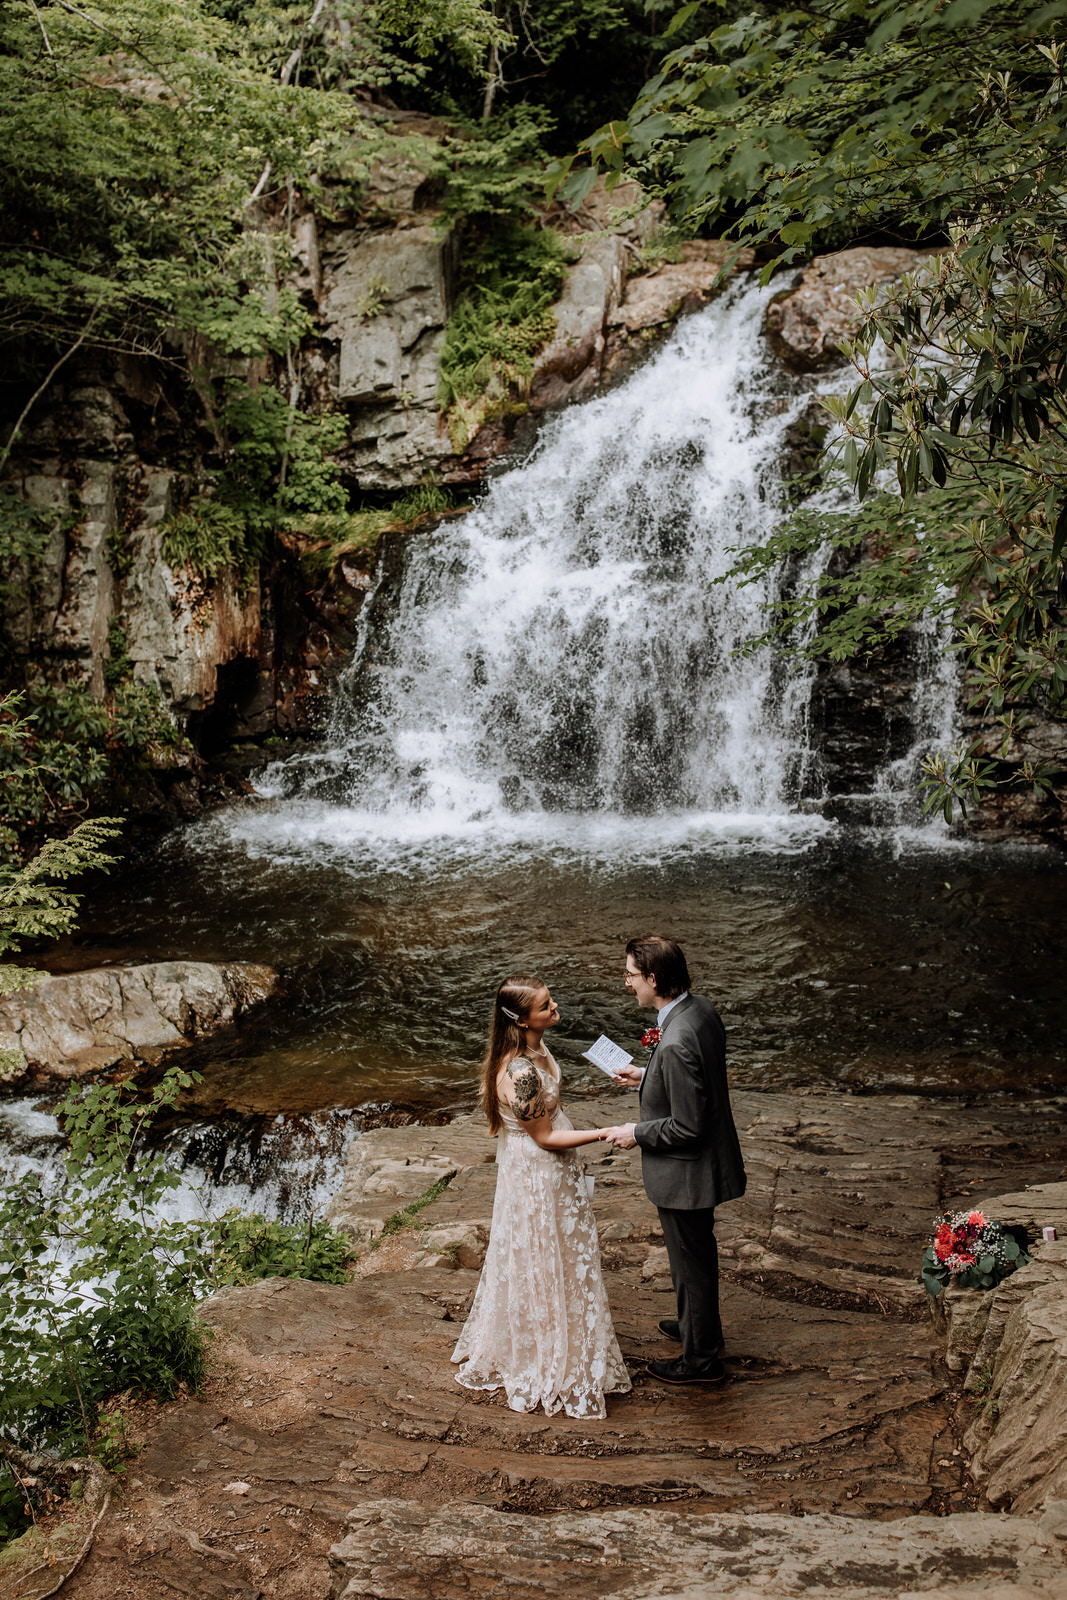 Man and woman reading vows during wedding ceremony in front of a waterfall